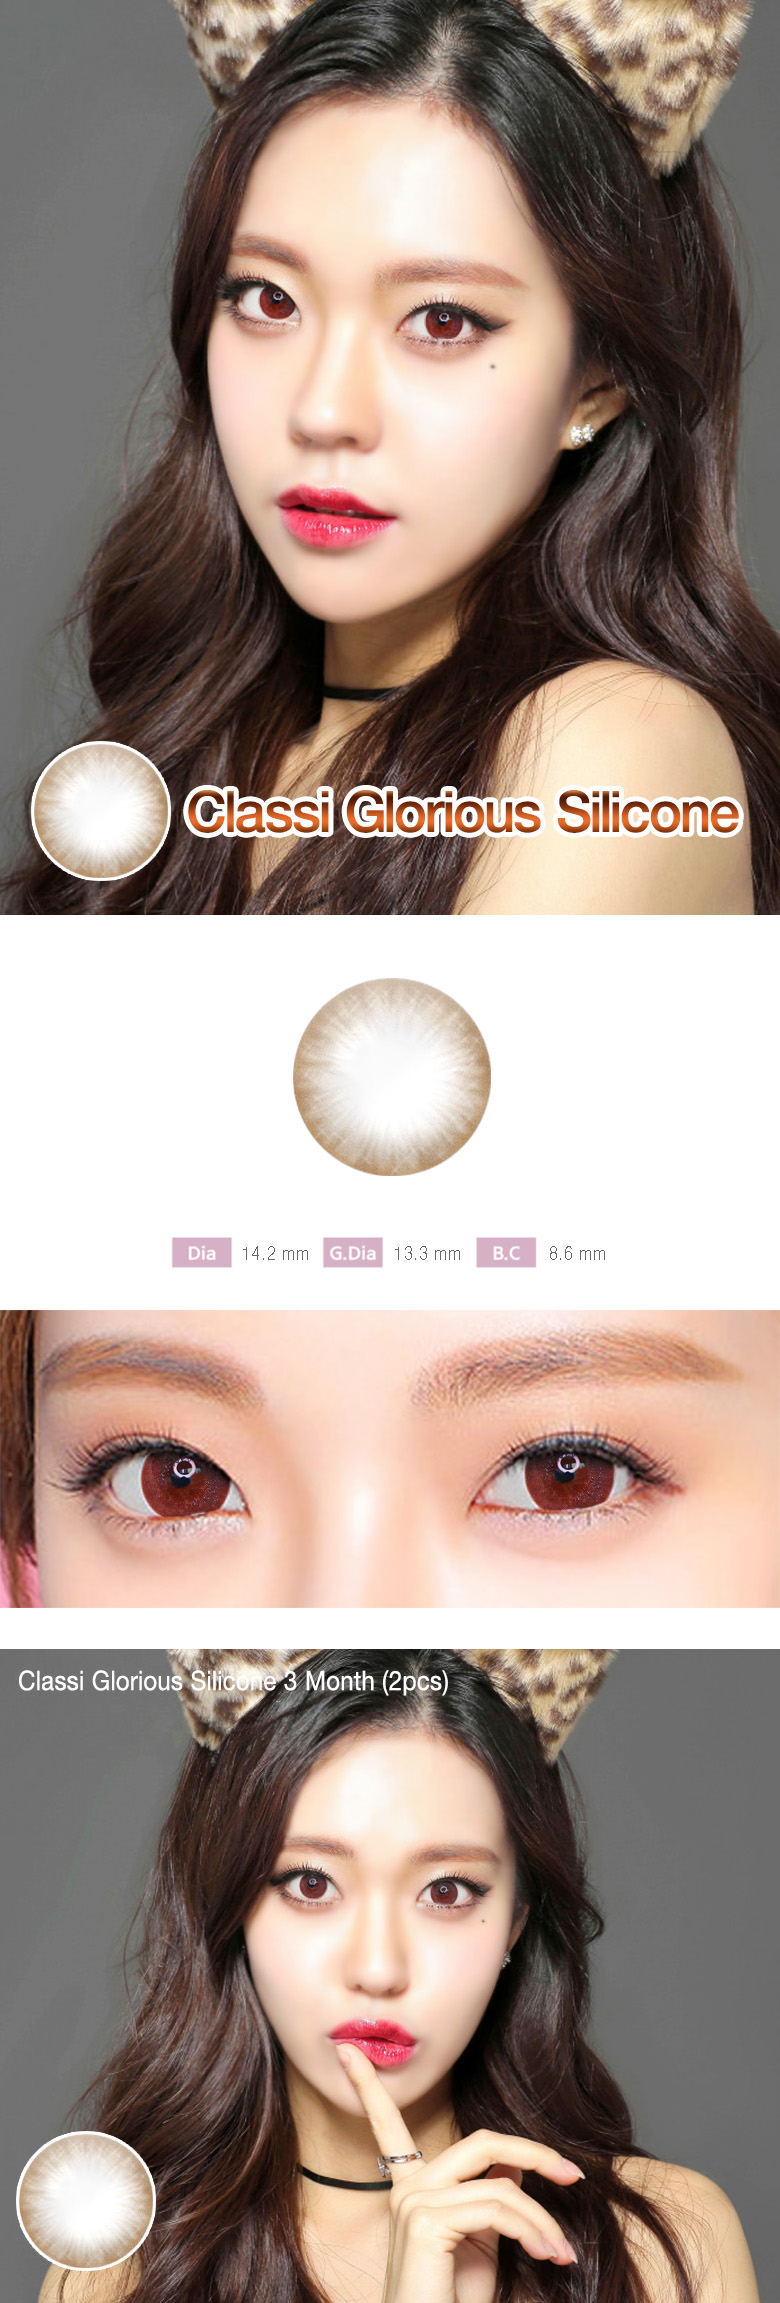 [3 Month/チョコ/CHOCO] クラシ グロリアス シリコン 3ヶ月 - Classi Glorious Silicone 3 Month (2pcs) [14.2mm]